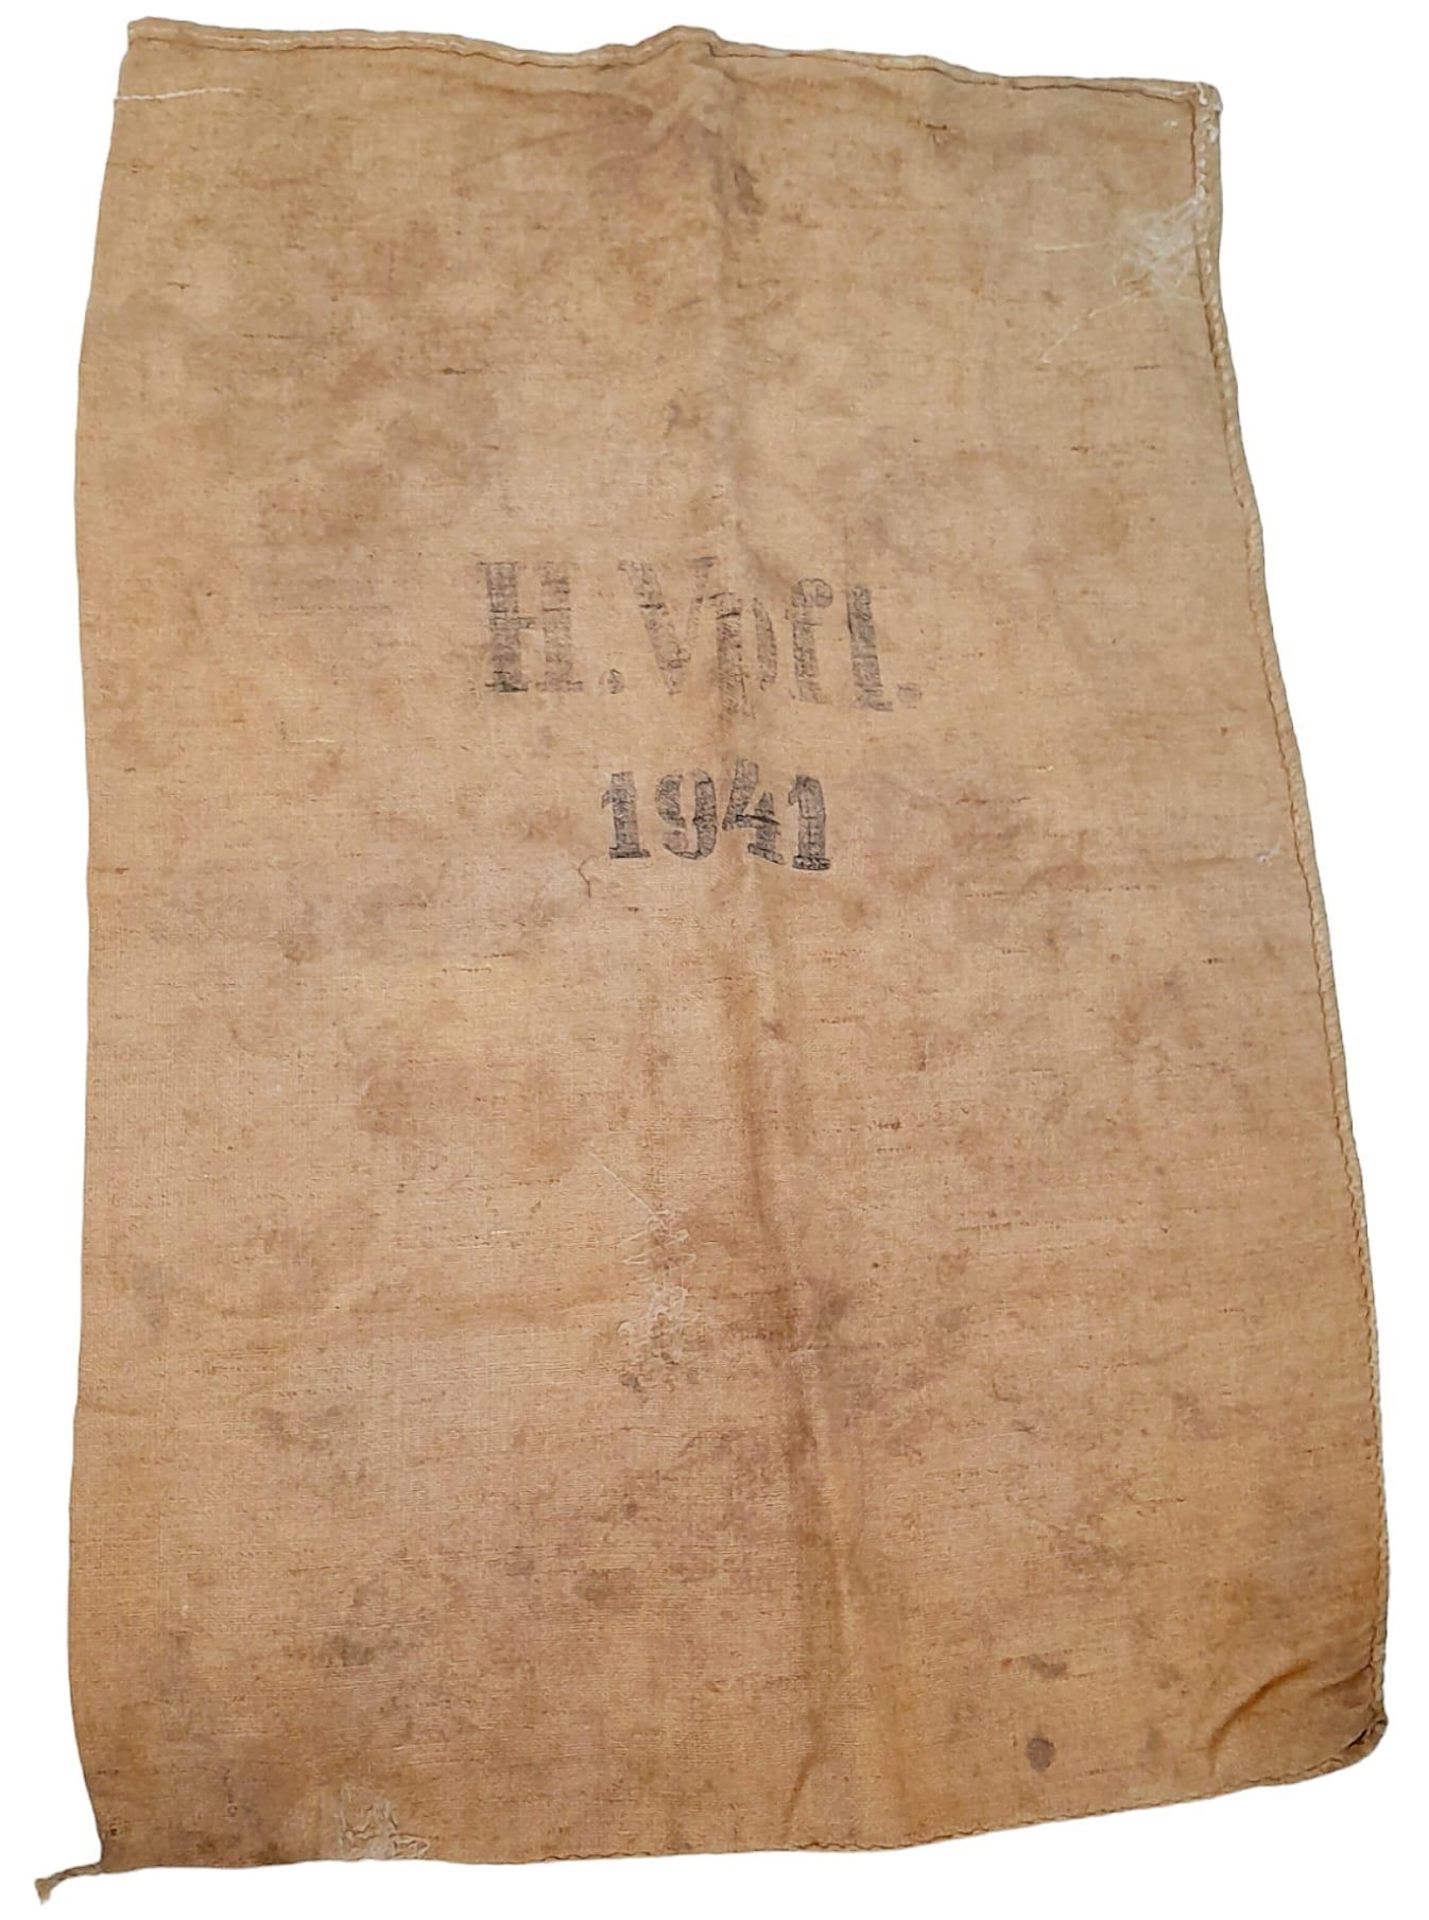 WW2 German Grain Sack for the Army Rations Dept - Image 2 of 4